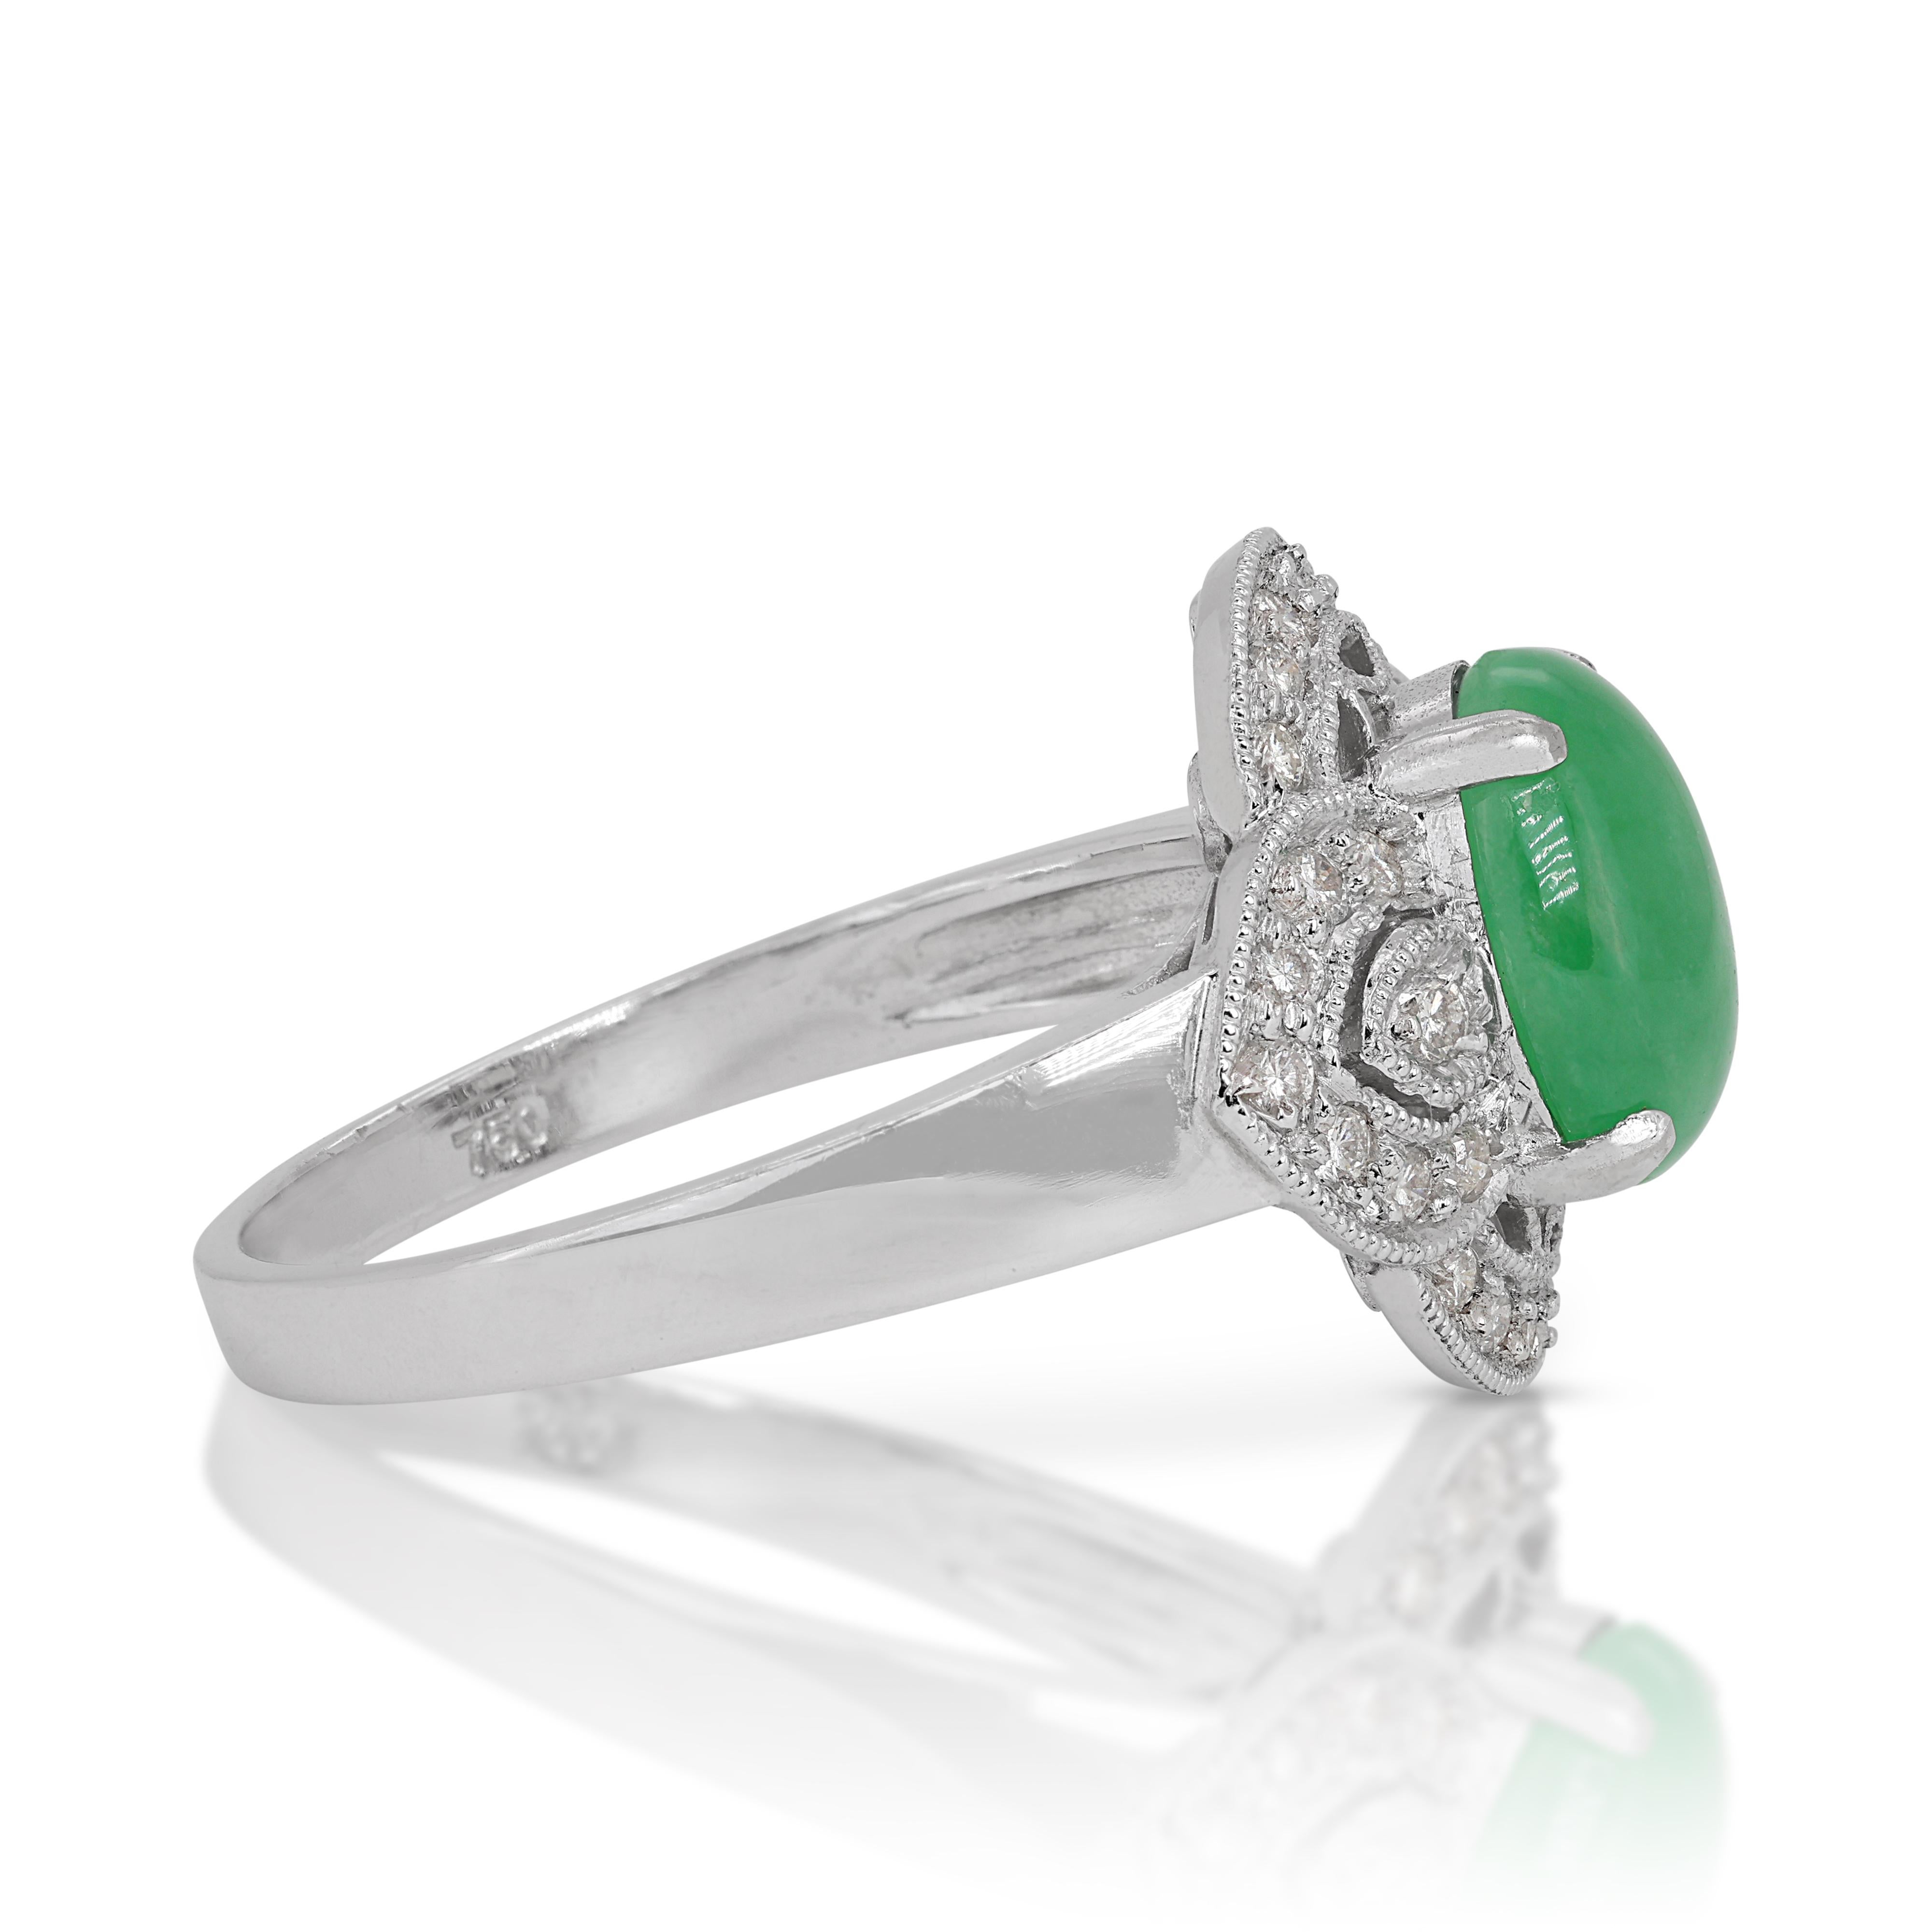 Cabochon Bright Jade and Diamond Ring set in Gleaming 18K White Gold For Sale